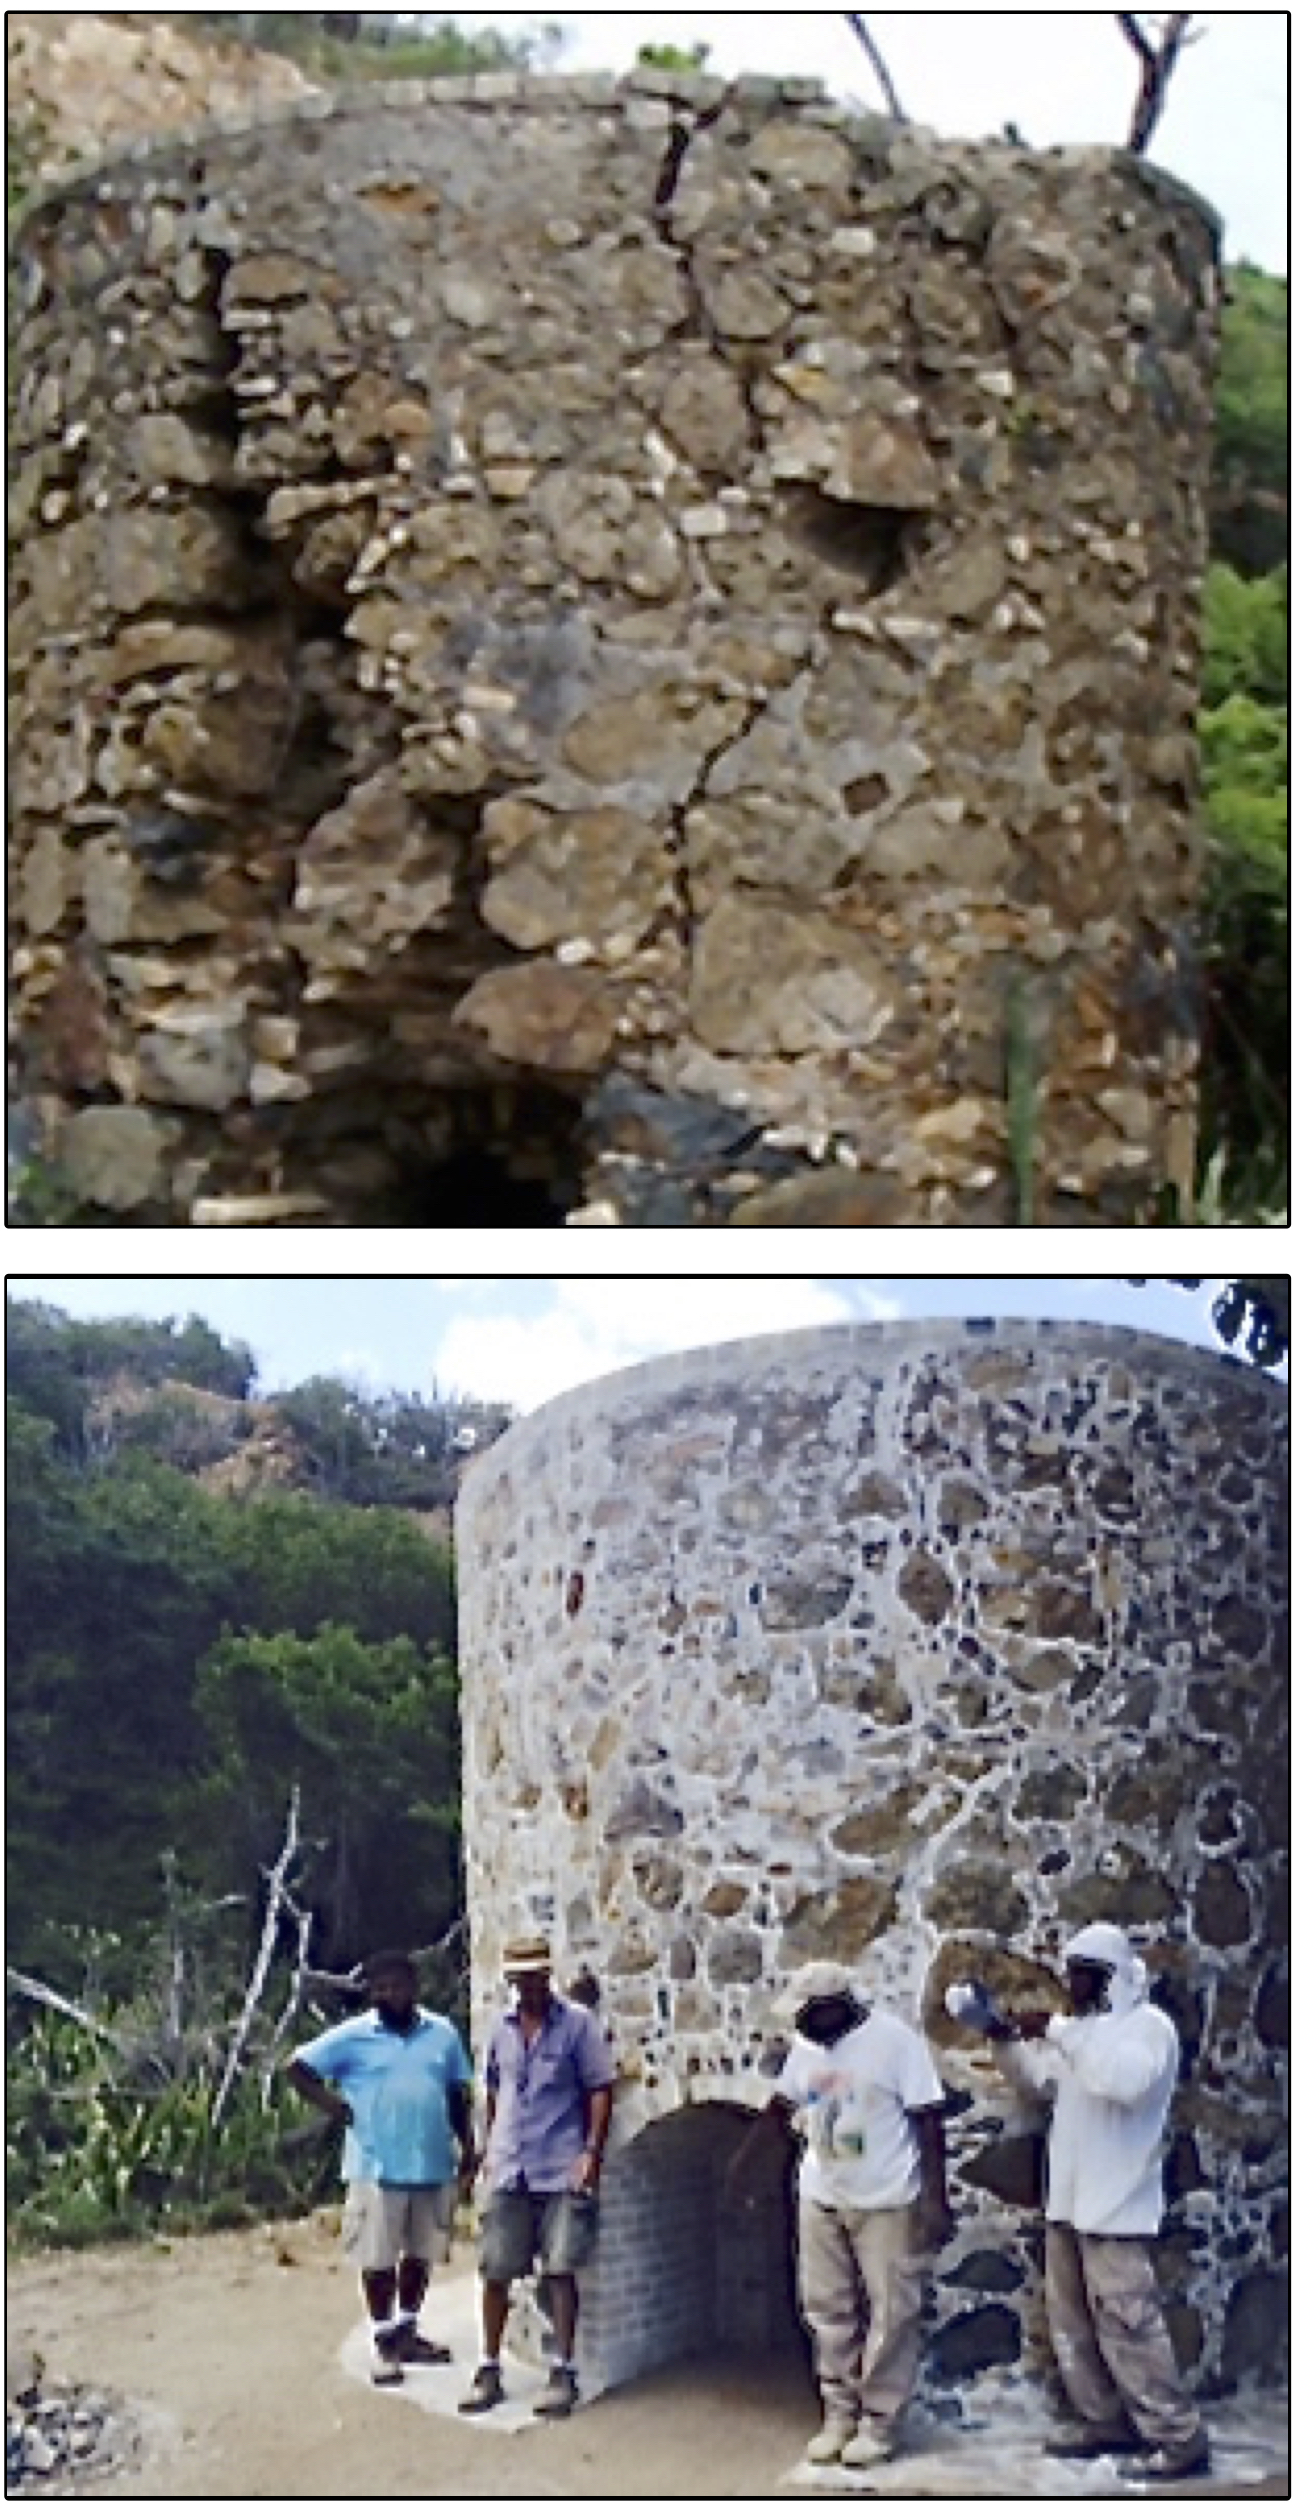 The Hassel Island lime kiln before it was repaired, aboive, and after the restoration. (Photos provided by the St. Thomas Historical Trust)